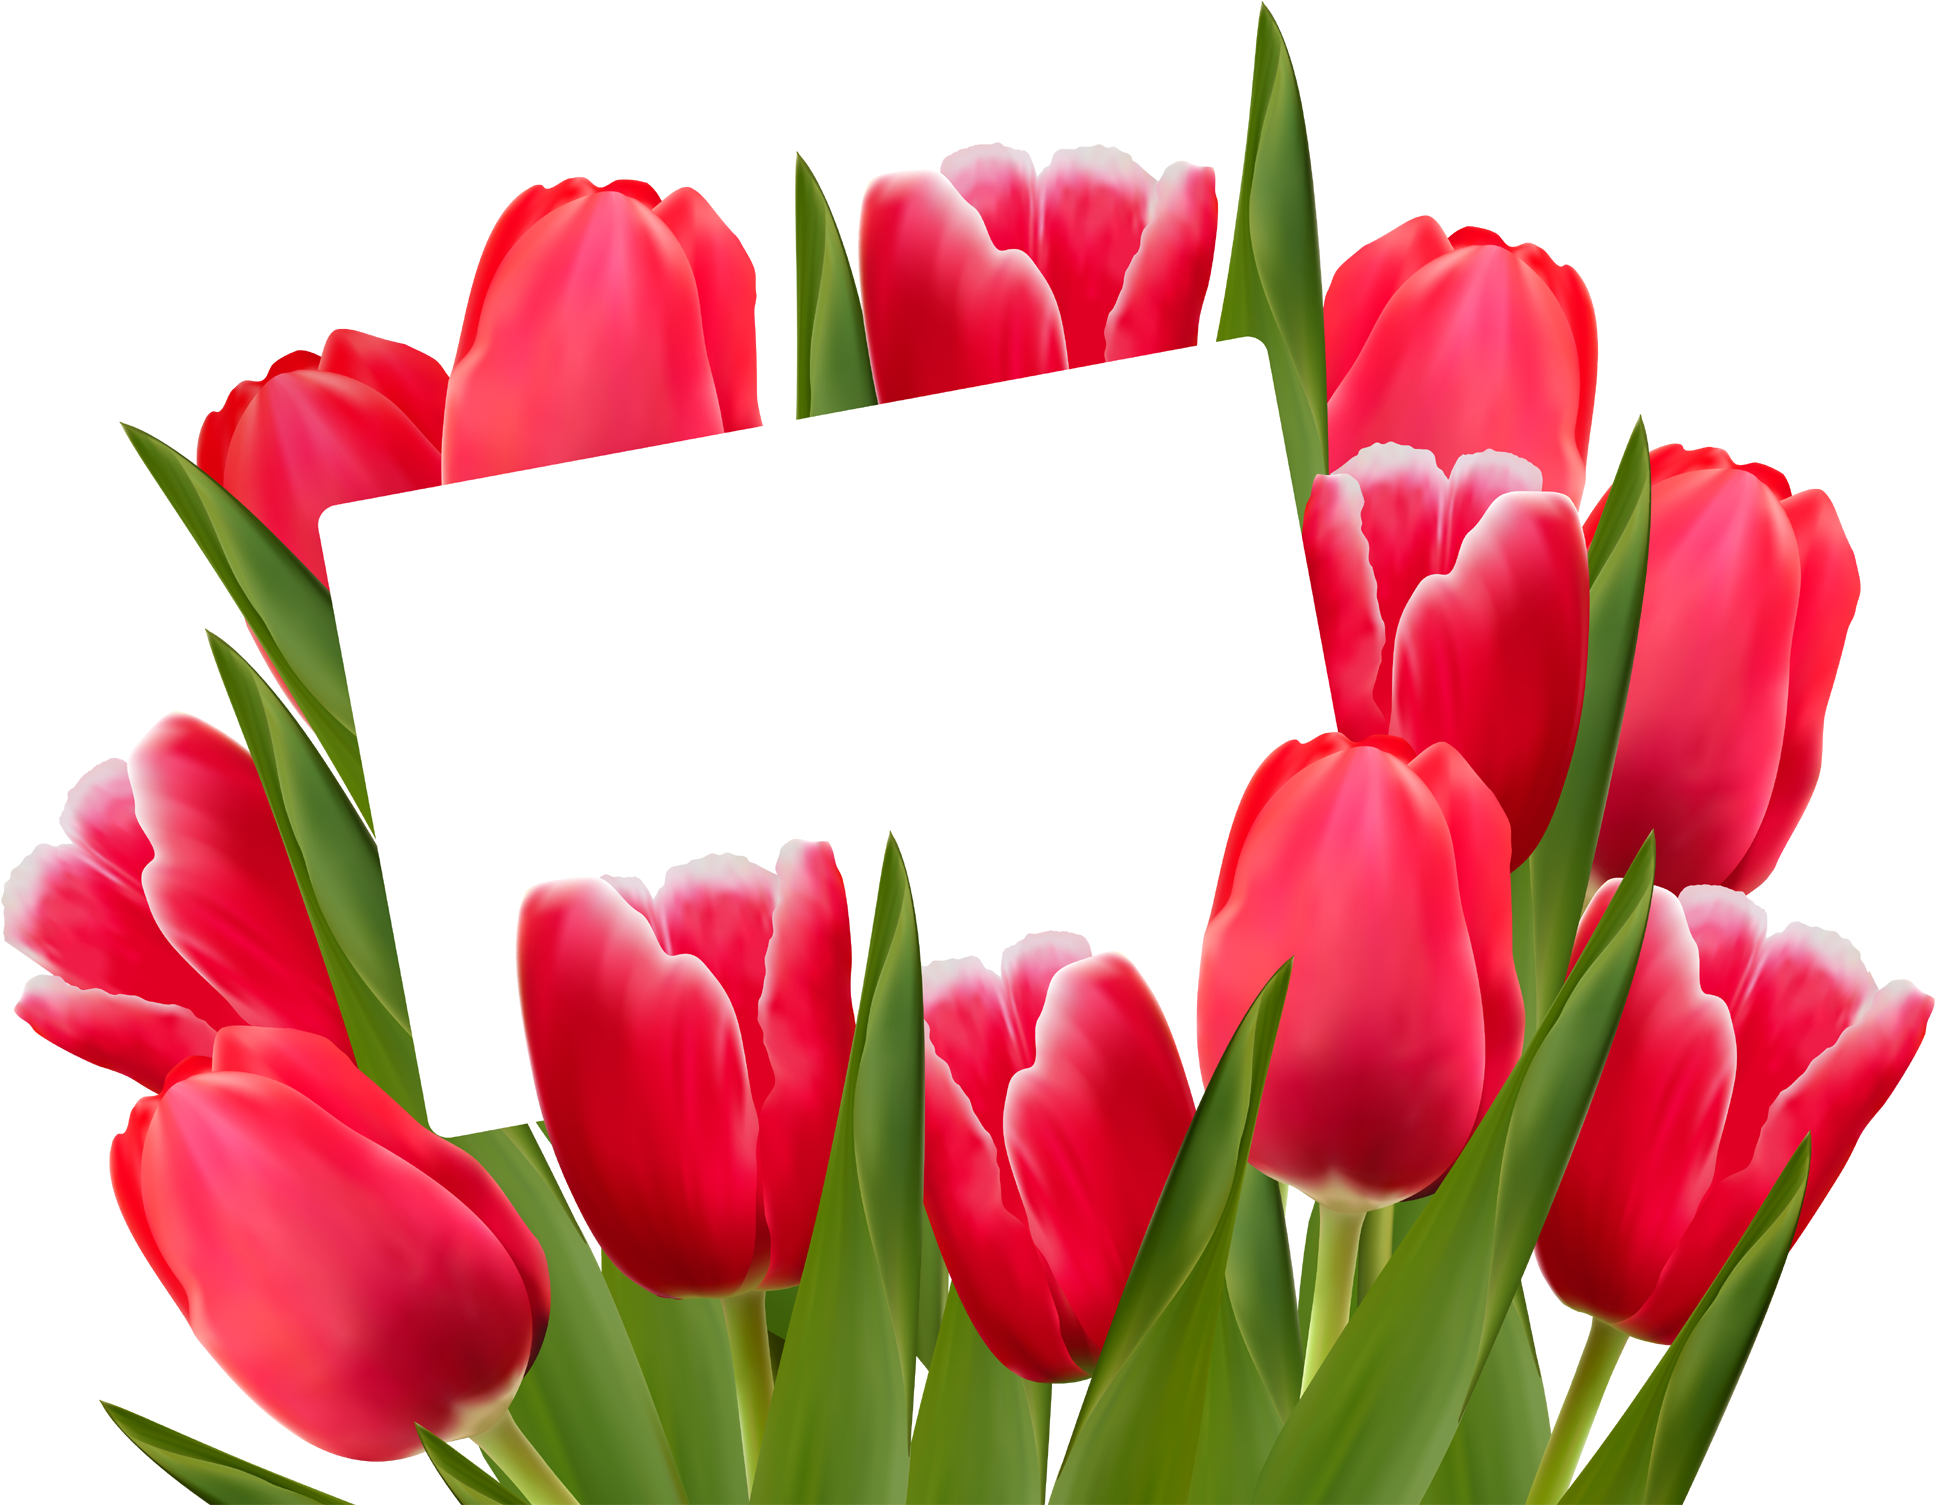 A Bunch Of Red Tulips With A White Card